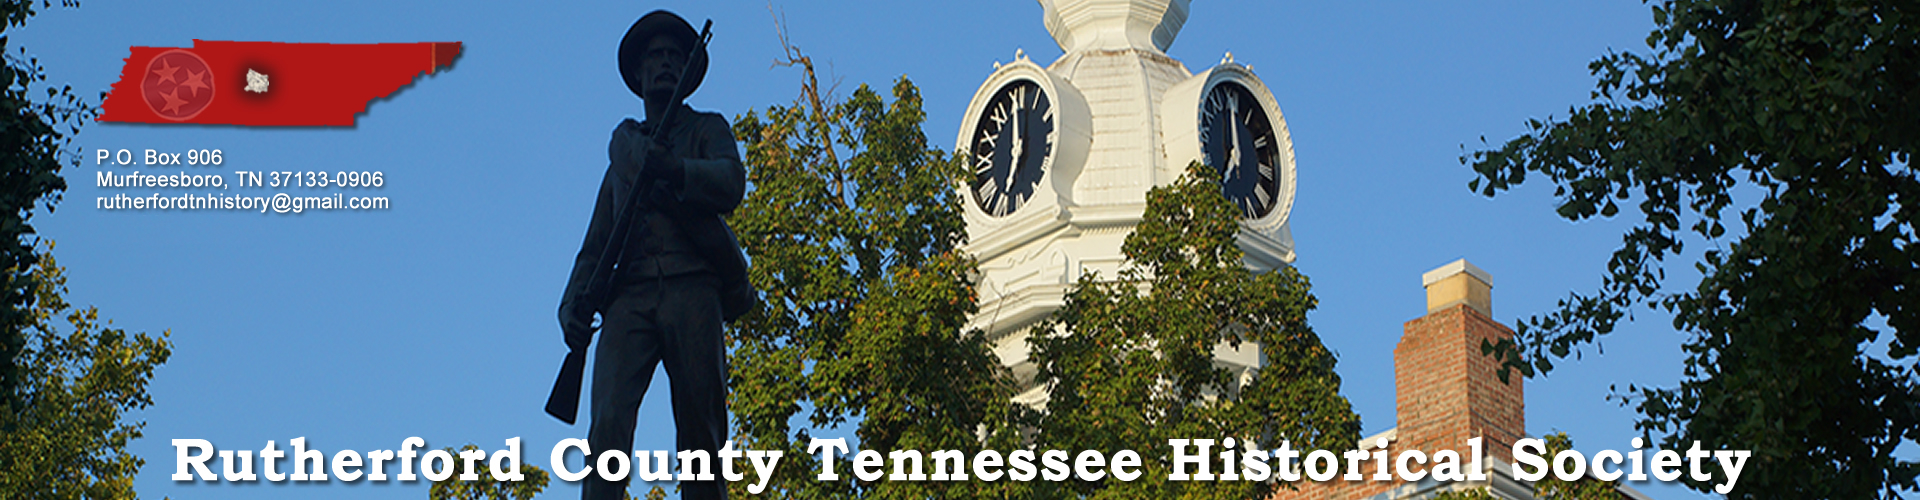 Rutherford County Tennessee Historical Society